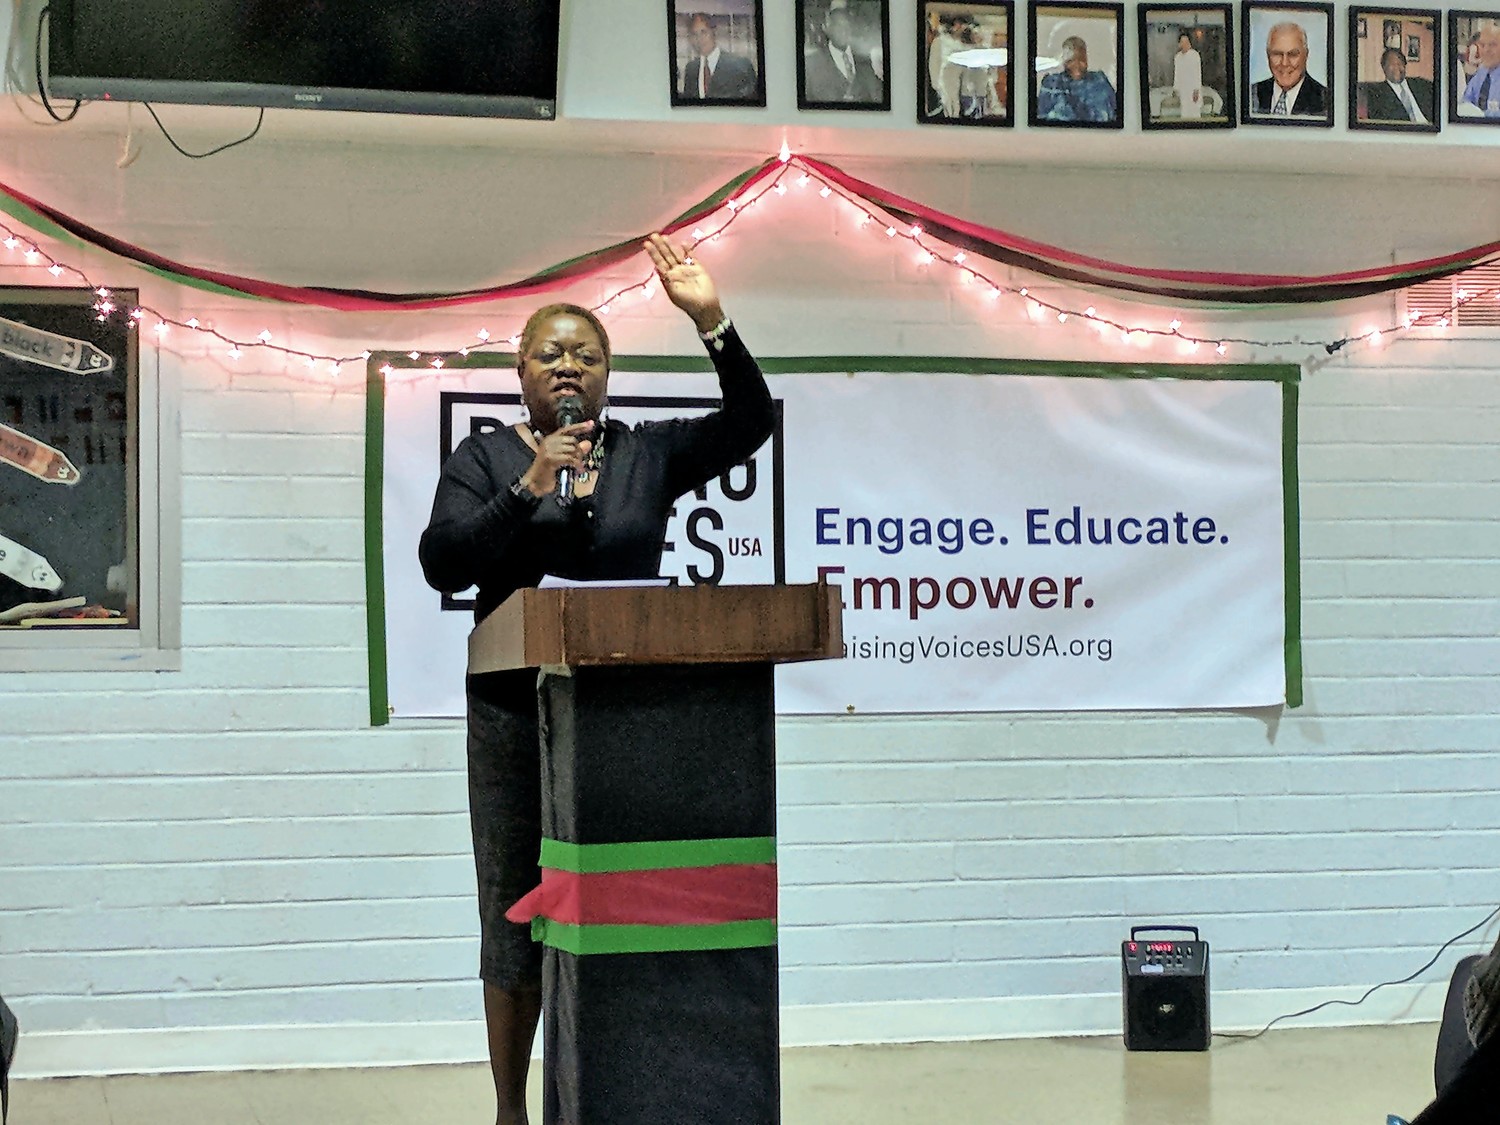 Theresa Sanders, president and CEO of the Urban League of Long Island, led a discussion at Rockville Centre’s Martin Luther King Jr. Center on Feb. 27.